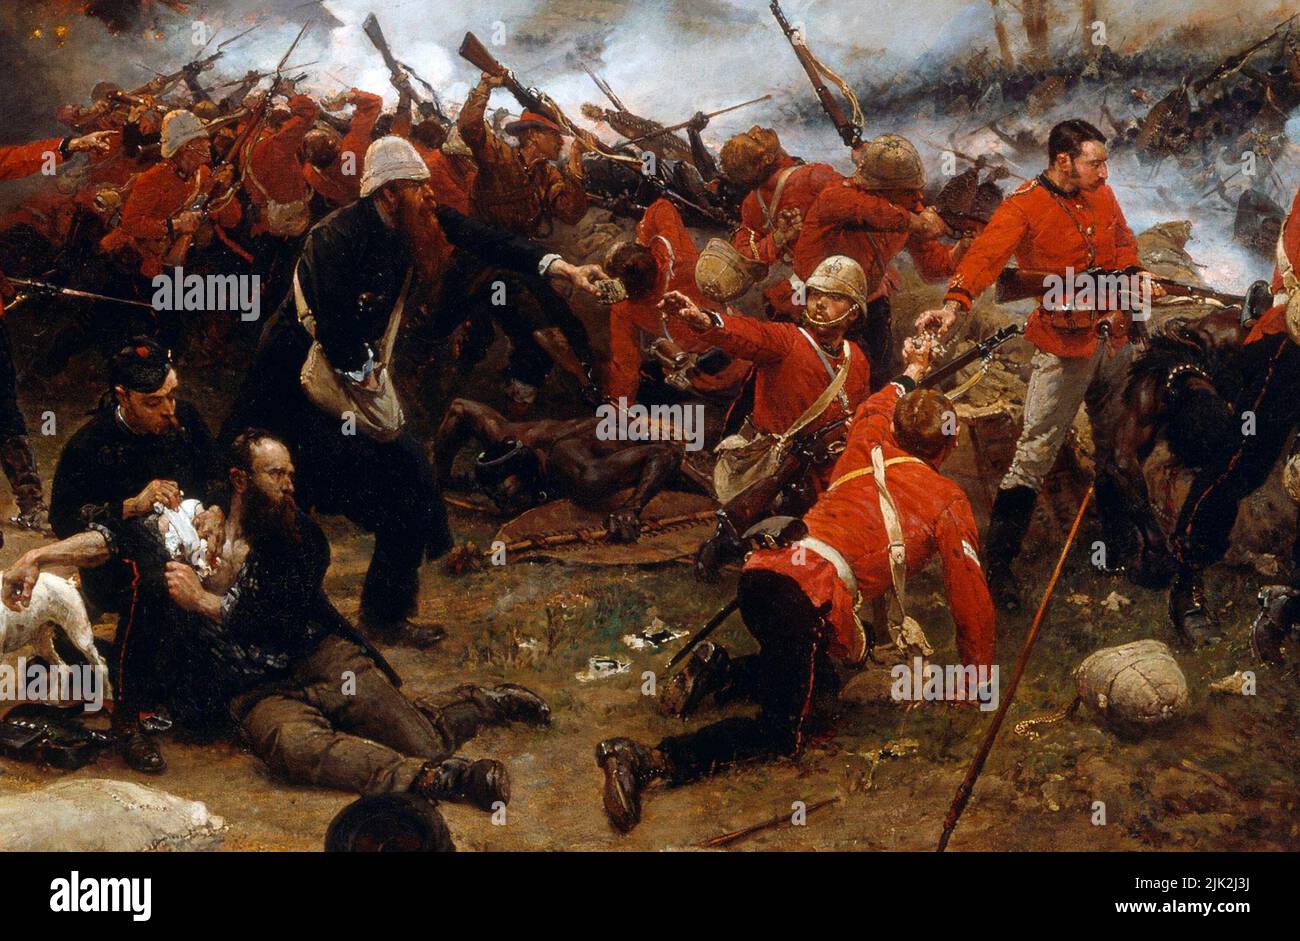 Detail from The Battle of Rorke's Drift painted by Alphonse de Neuville. It shows  Lieutenant John Chard (to the right at the barrier in pale breeches with rifle), Corporal William Allen (handing cartridges to Chard) and Chaplain George Smith (bearded man handing out cartridges from a haversack) Stock Photo